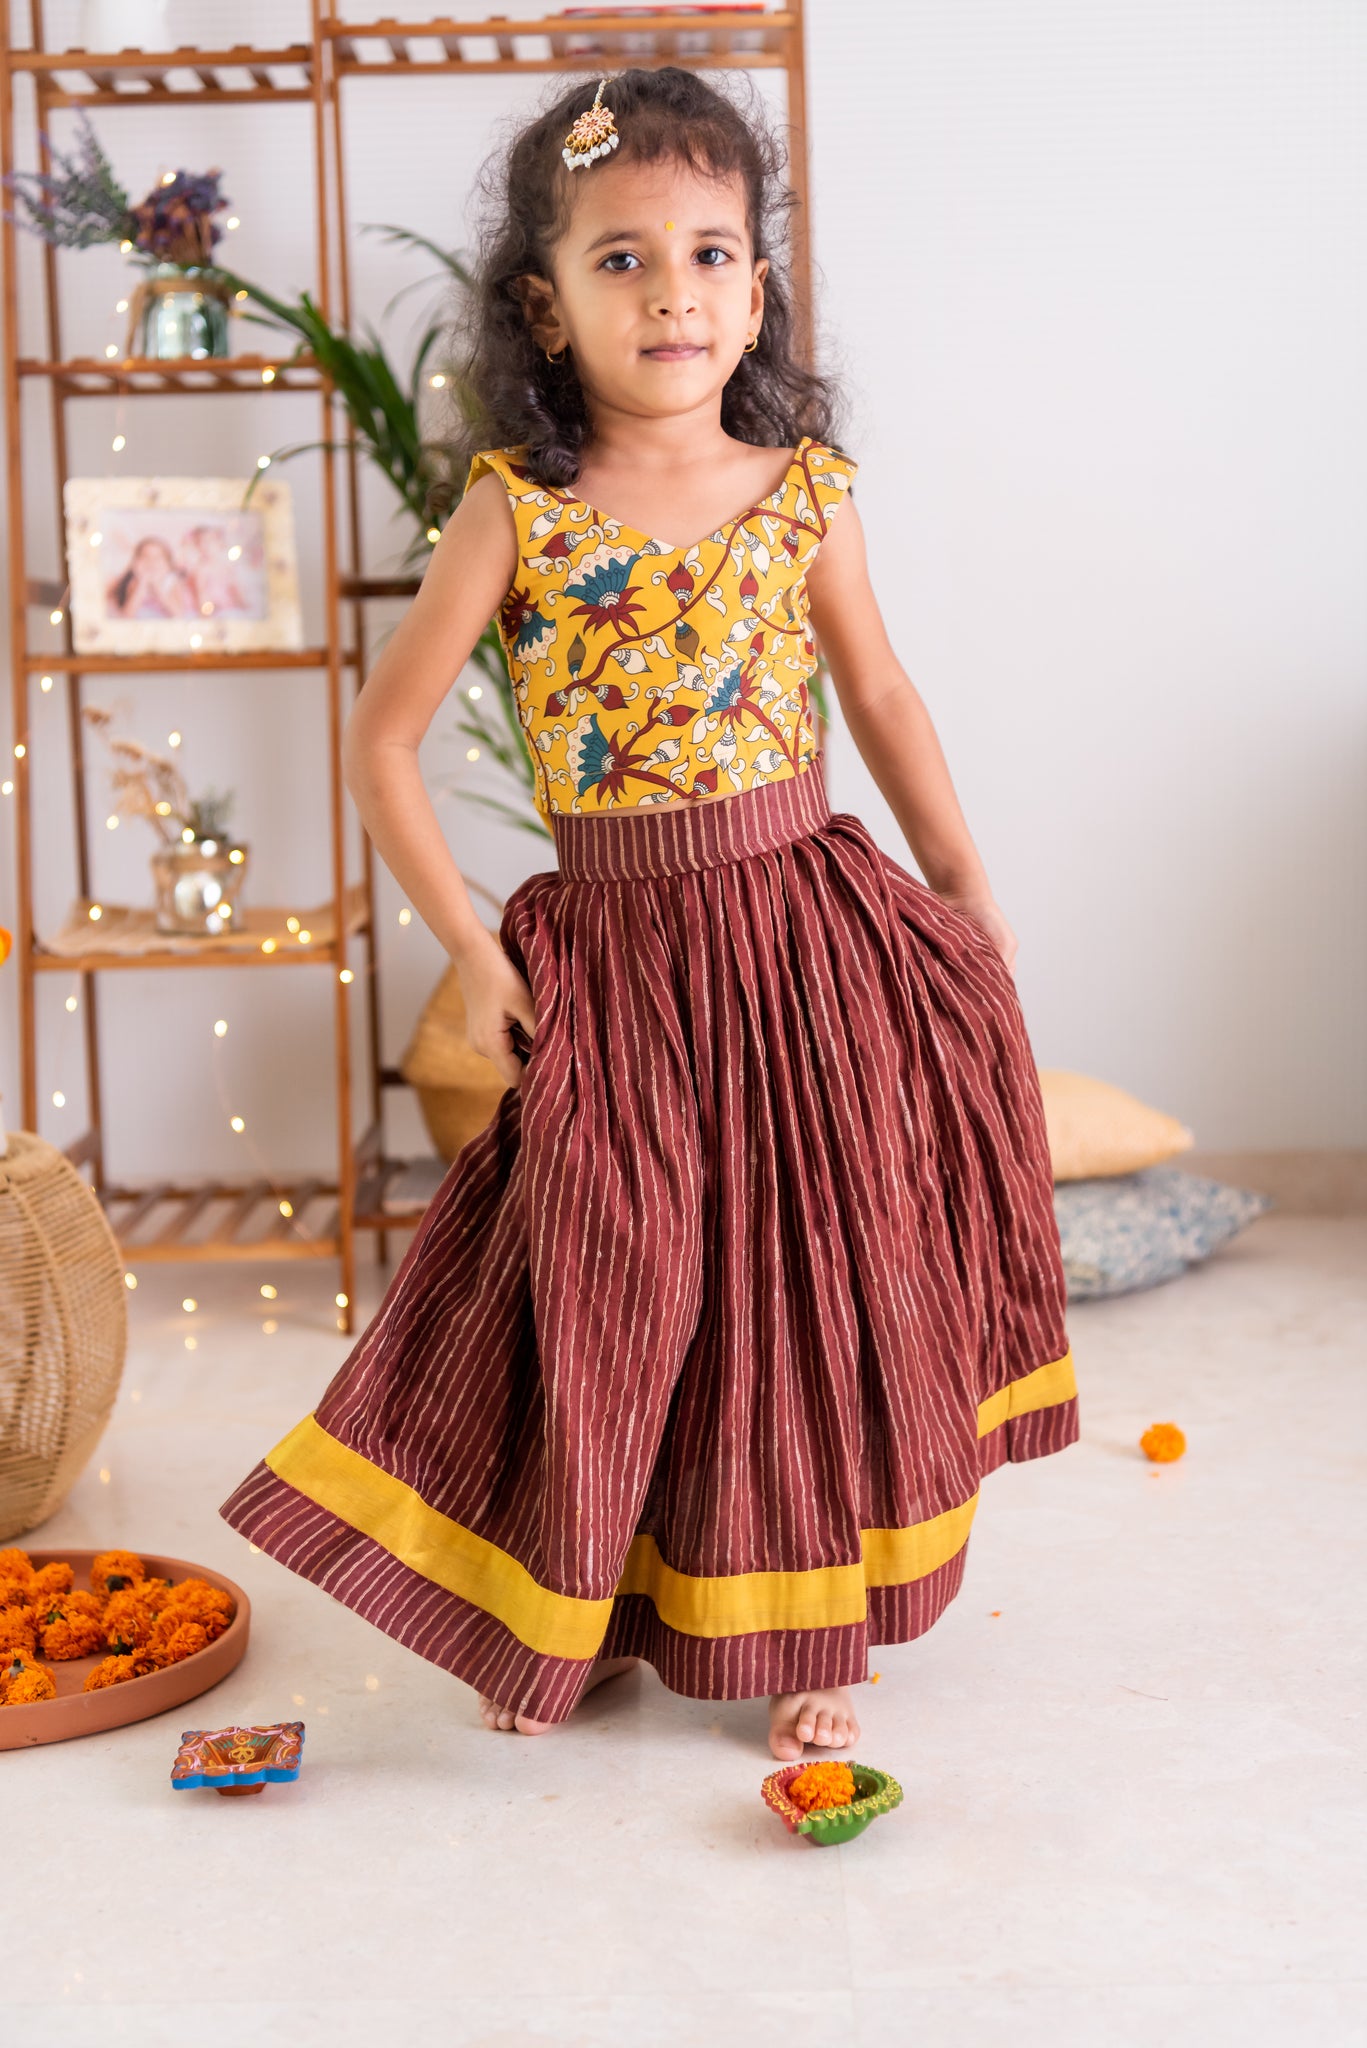 Buy Hauppers Fully Stitched Lehenga Choli with Dupatta for Girls |  Traditional Ethnic Lehenga Choli Dress for Party, Funtions & Festivals -  Peach, 8-9Year at Amazon.in